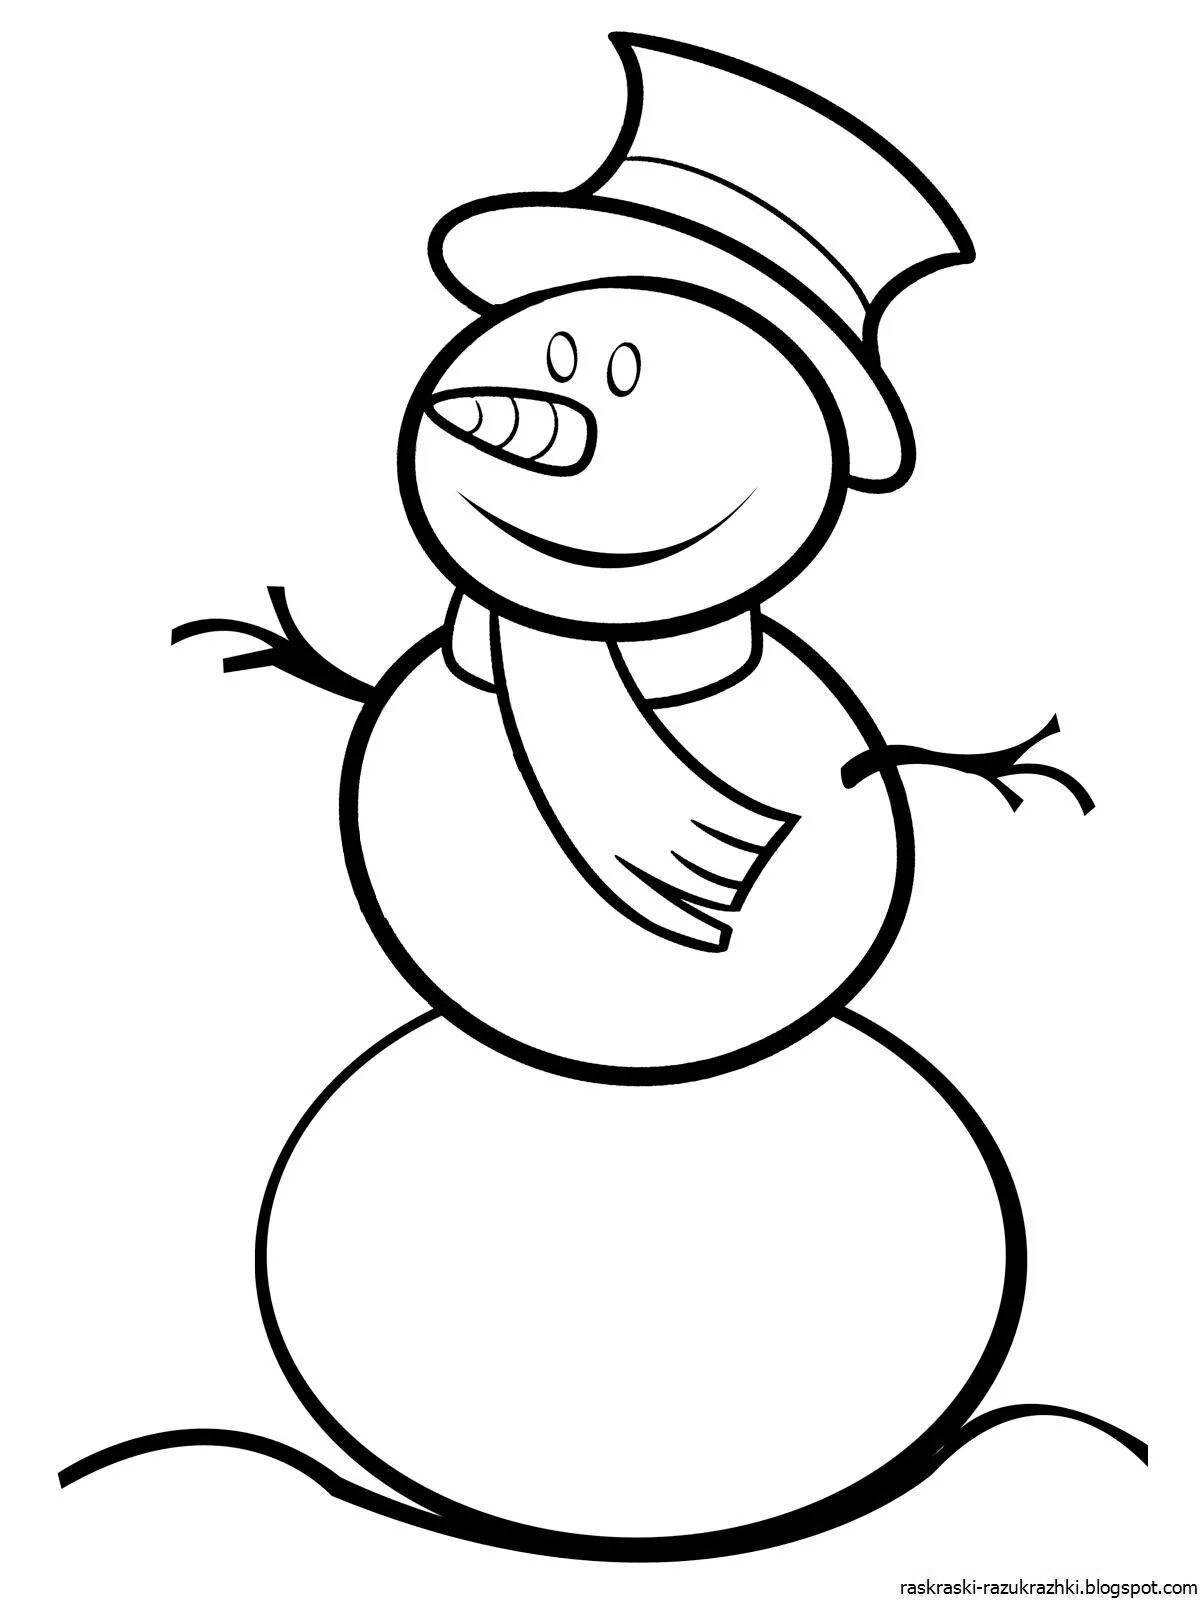 Cute snowman coloring book for kids 6-7 years old